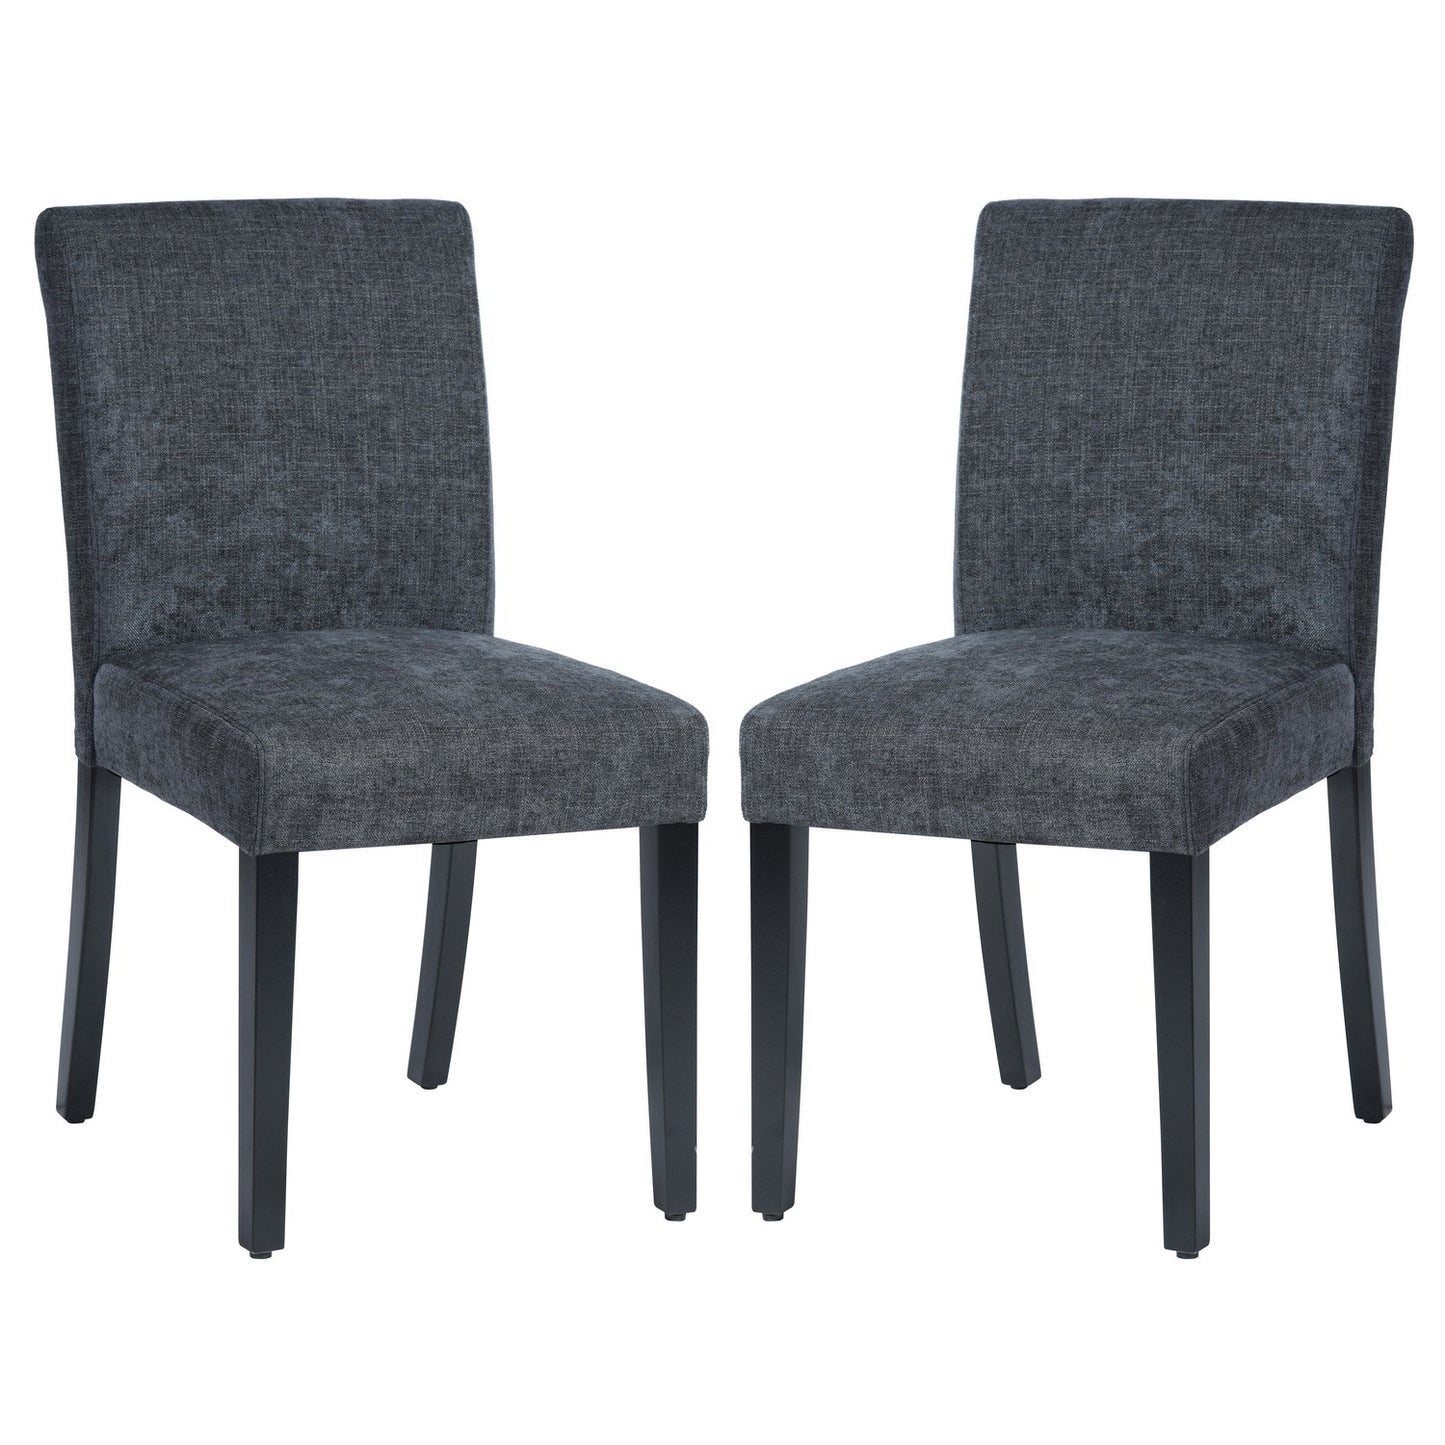 Upholstered Dining Chairs Set of 2 Modern Dining Chairs with Solid Wood Legs;  Dark Blue